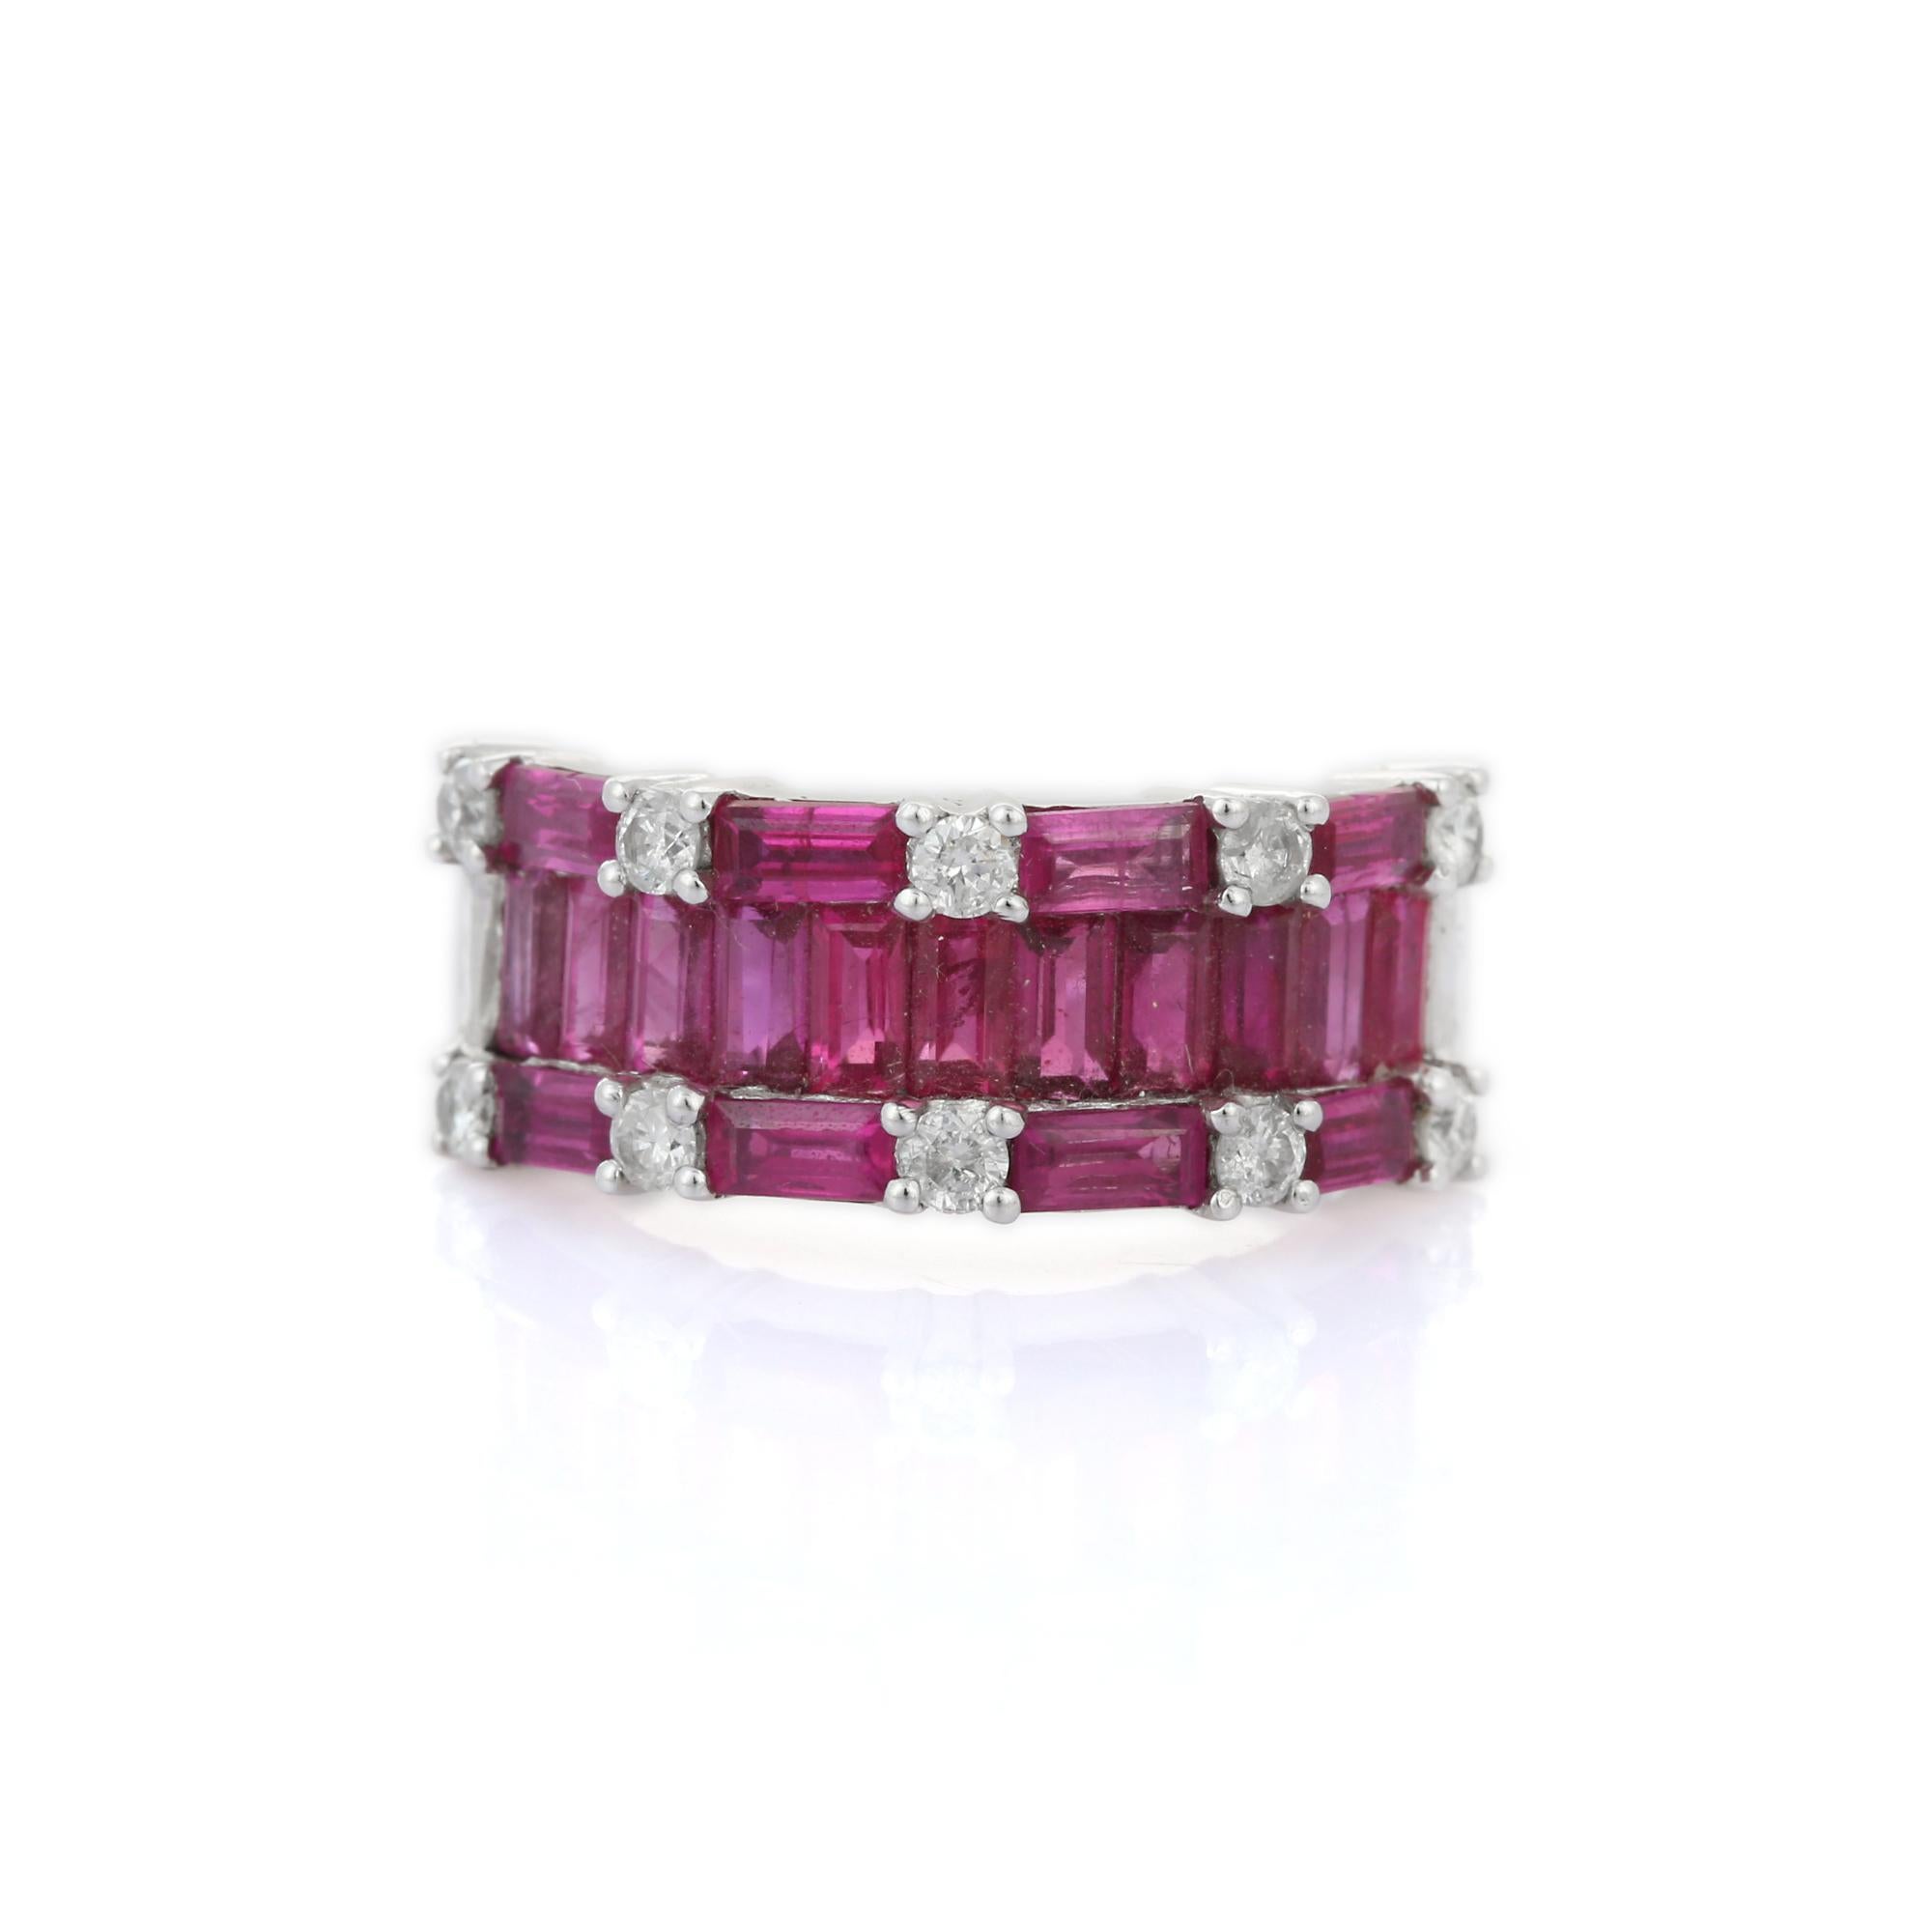 For Sale:  14K White Gold 3.19 Ct Ruby Baguettes Cluster Wedding Band Ring with Diamond 2